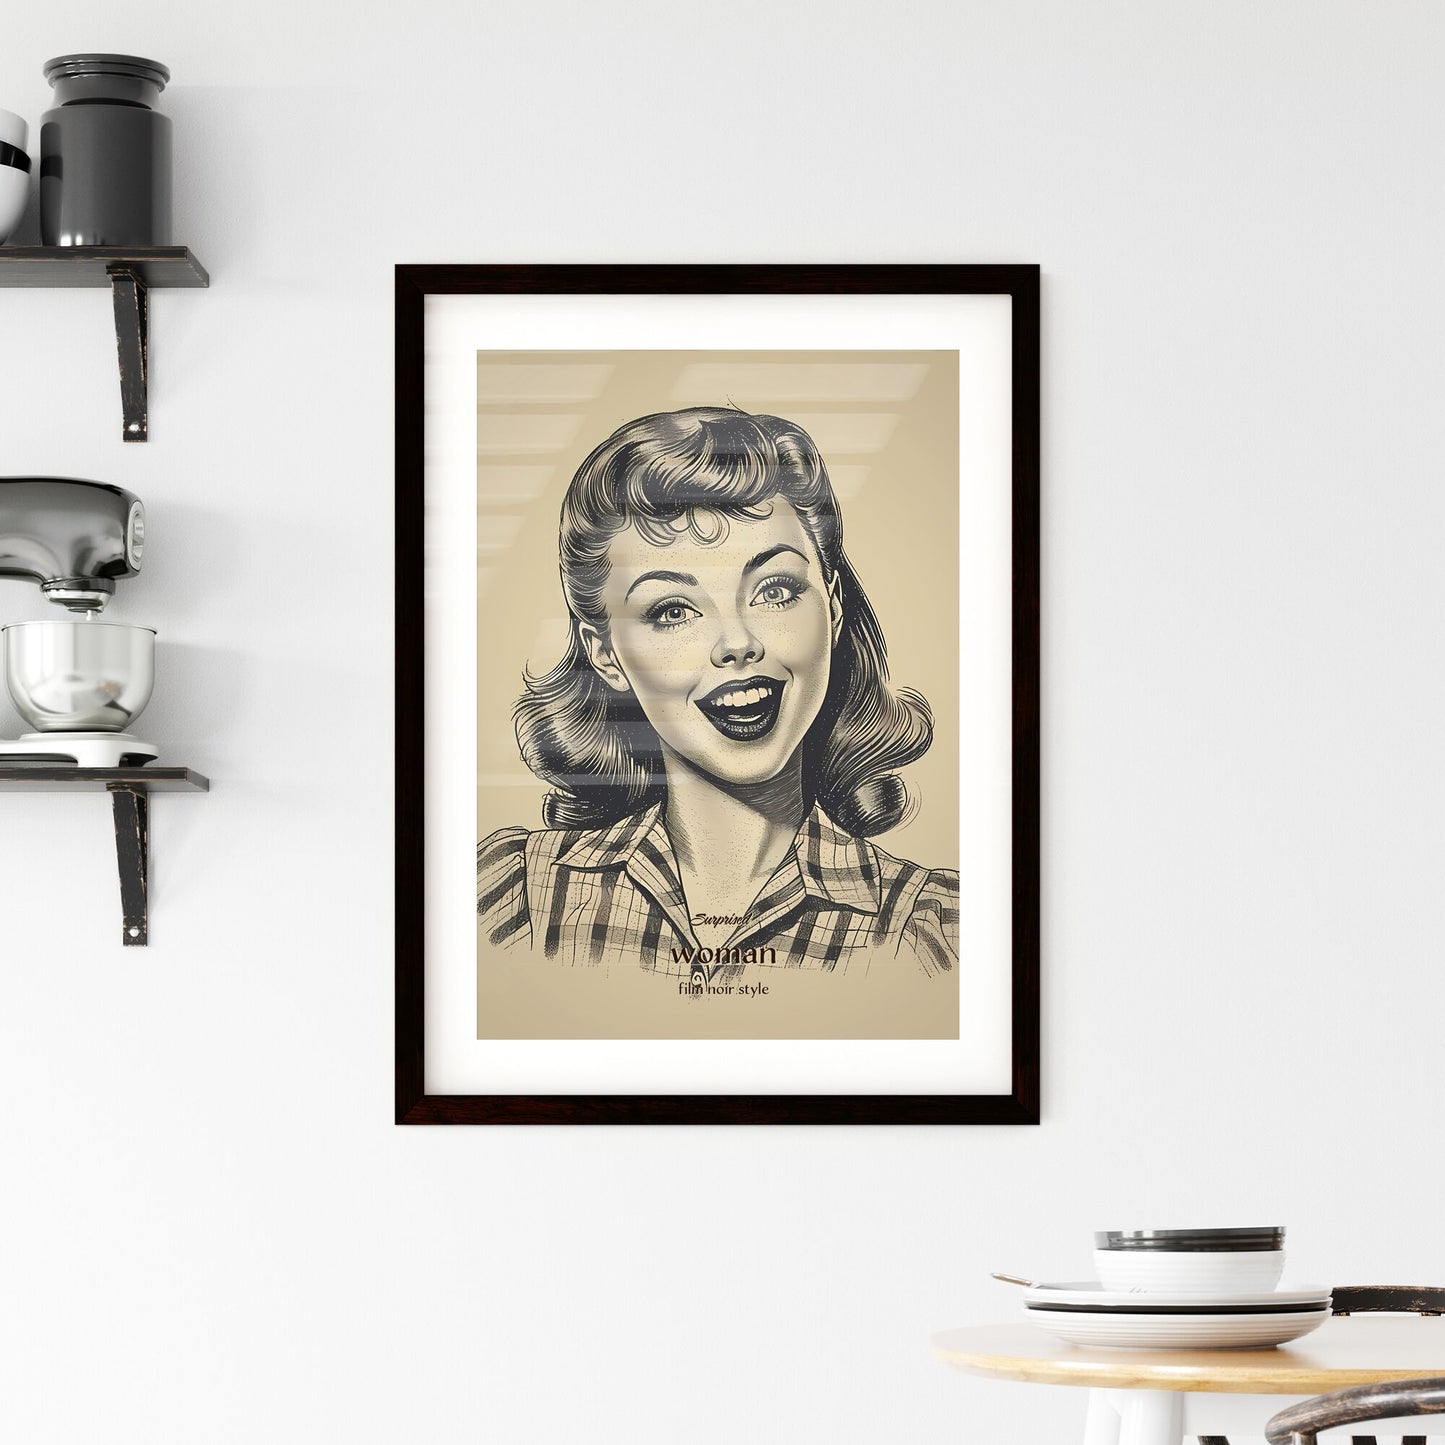 Surprised, woman, film noir style, A Poster of a woman with a smile Default Title